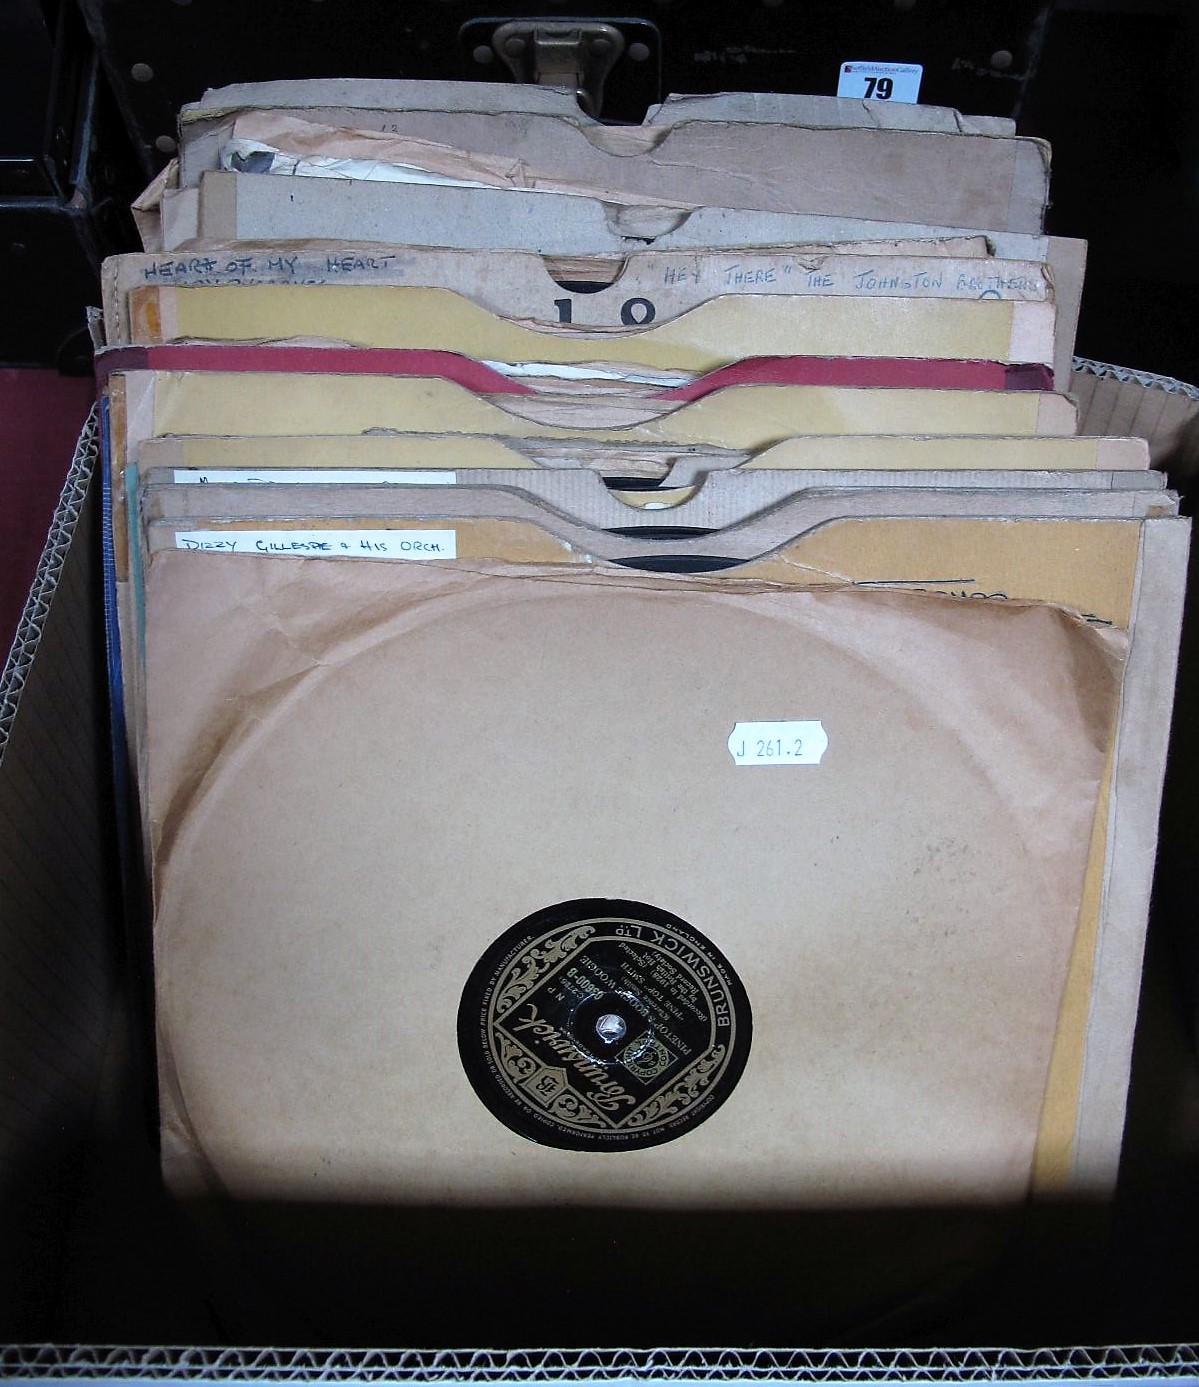 A Nice Collection of Jazz Themed 78 RPM's, including Dizzy Gillespie, Pine Top Smith, Kenny Graham's